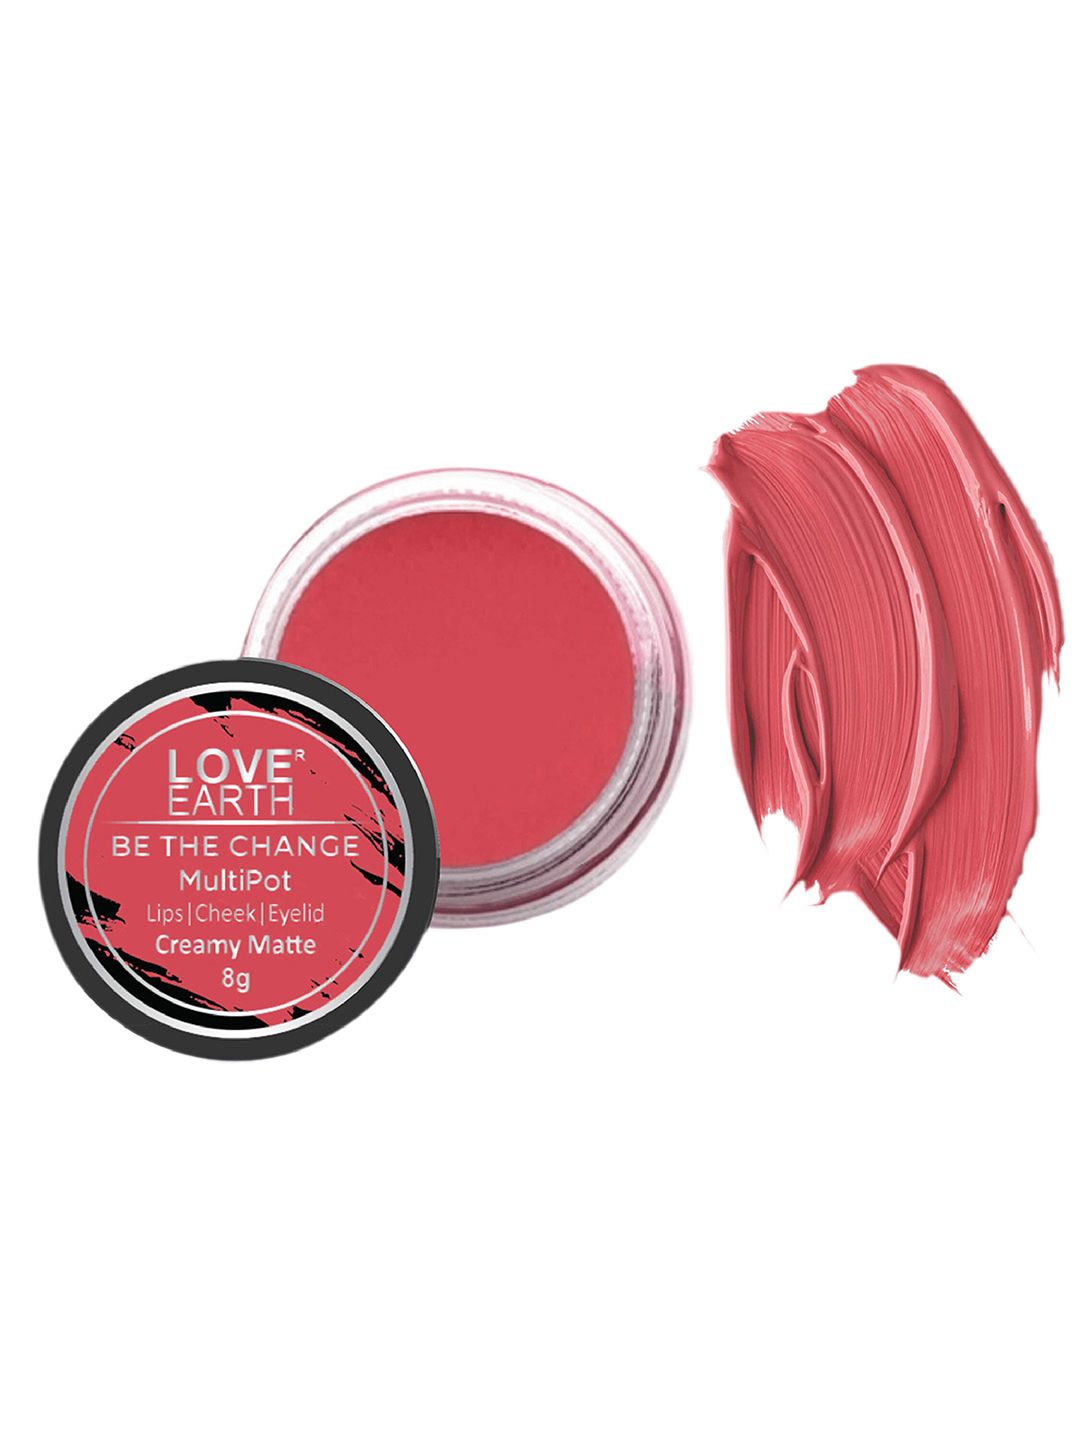 LOVE EARTH Multipot Creamy Matte Lip-Cheek-Eyelid Tint - Be The Change Price in India